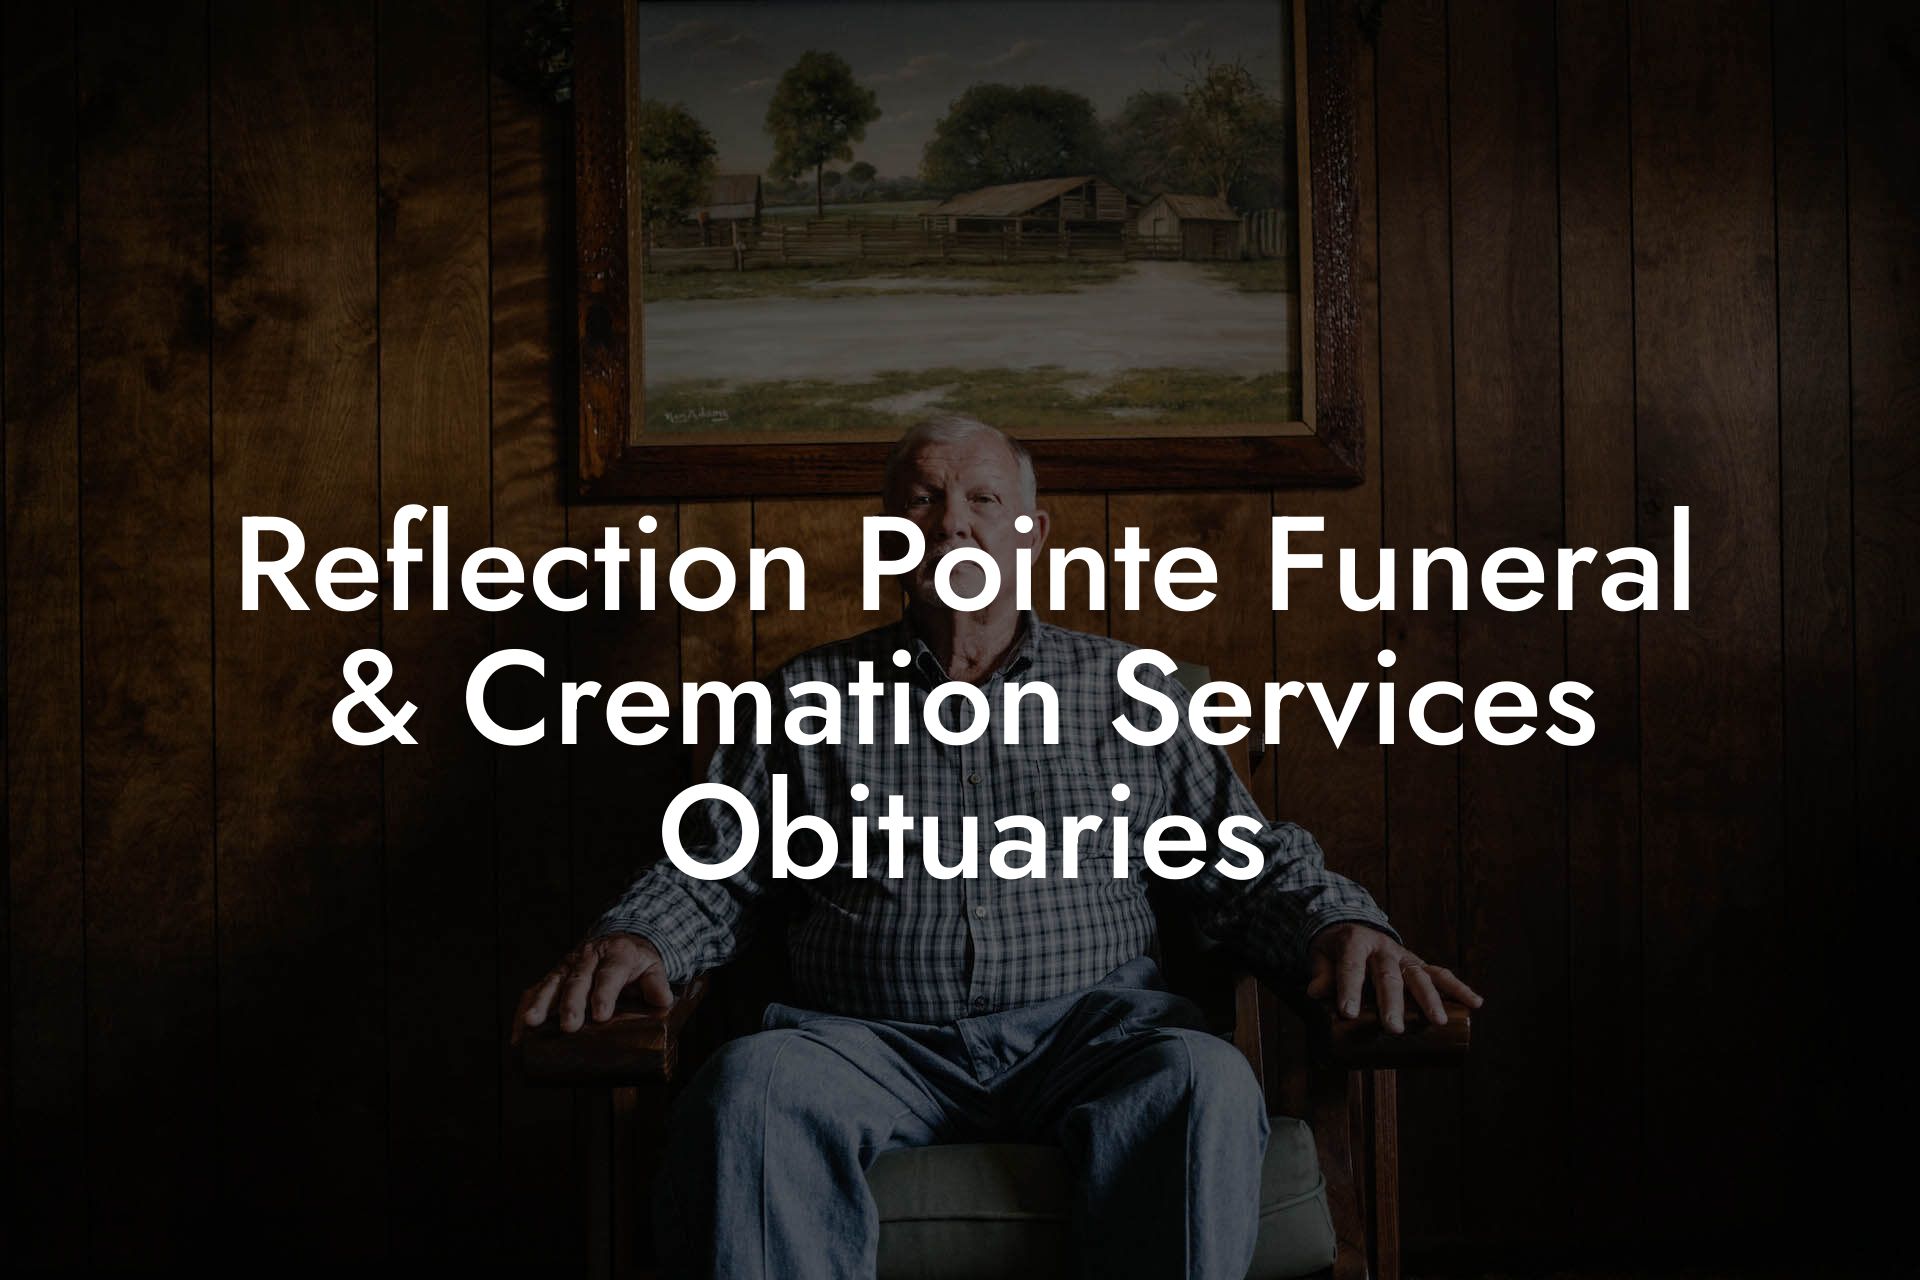 Reflection Pointe Funeral & Cremation Services Obituaries